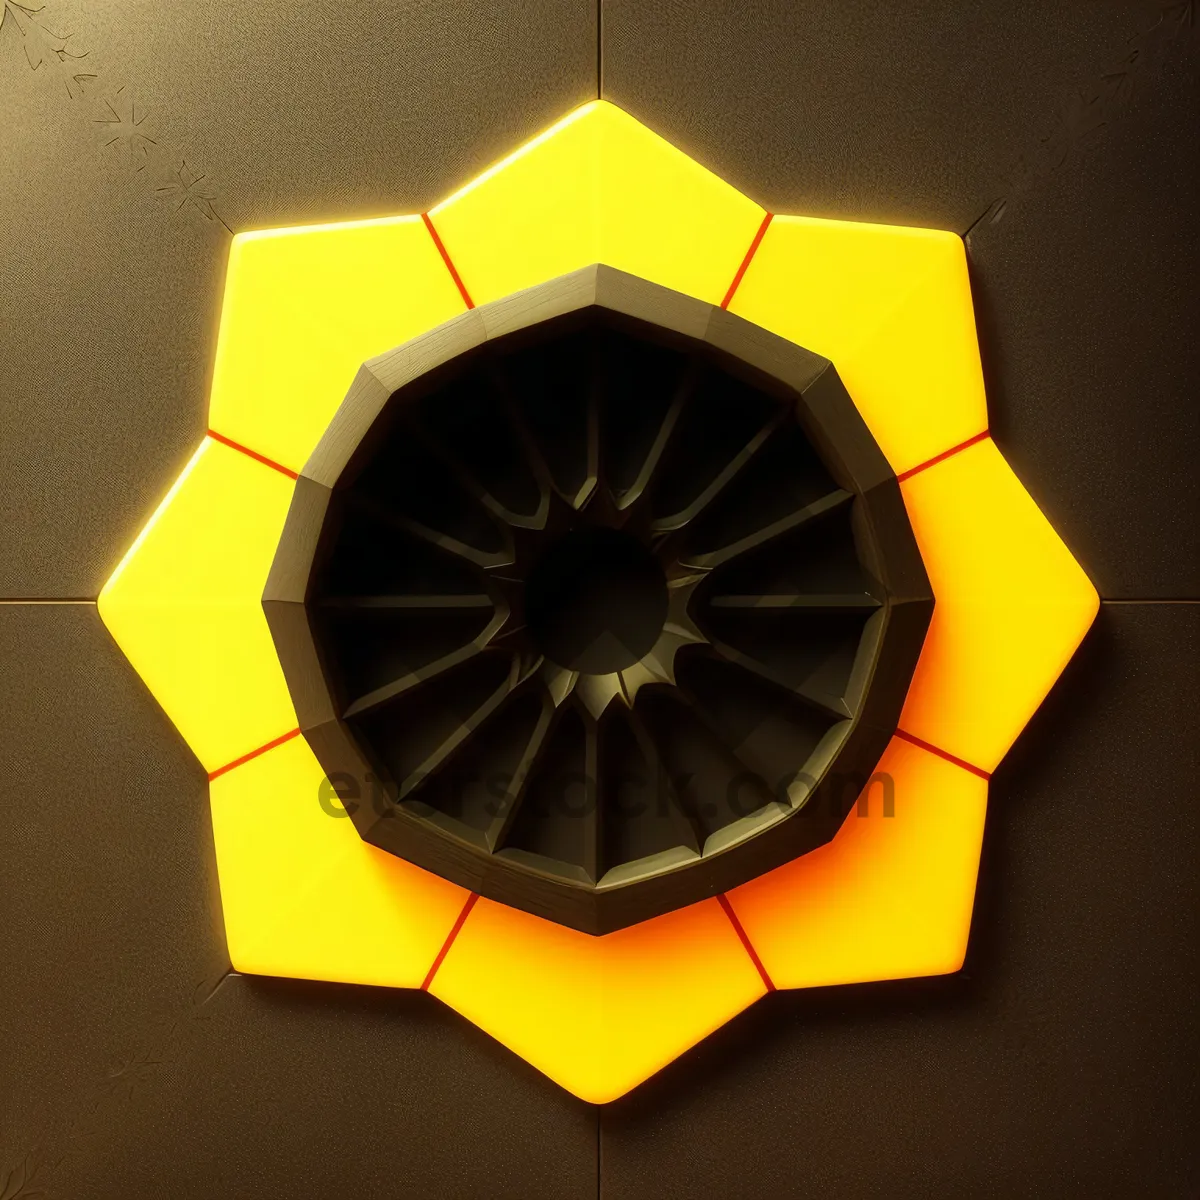 Picture of Rotating 3D Wall Clock with Fan Blades